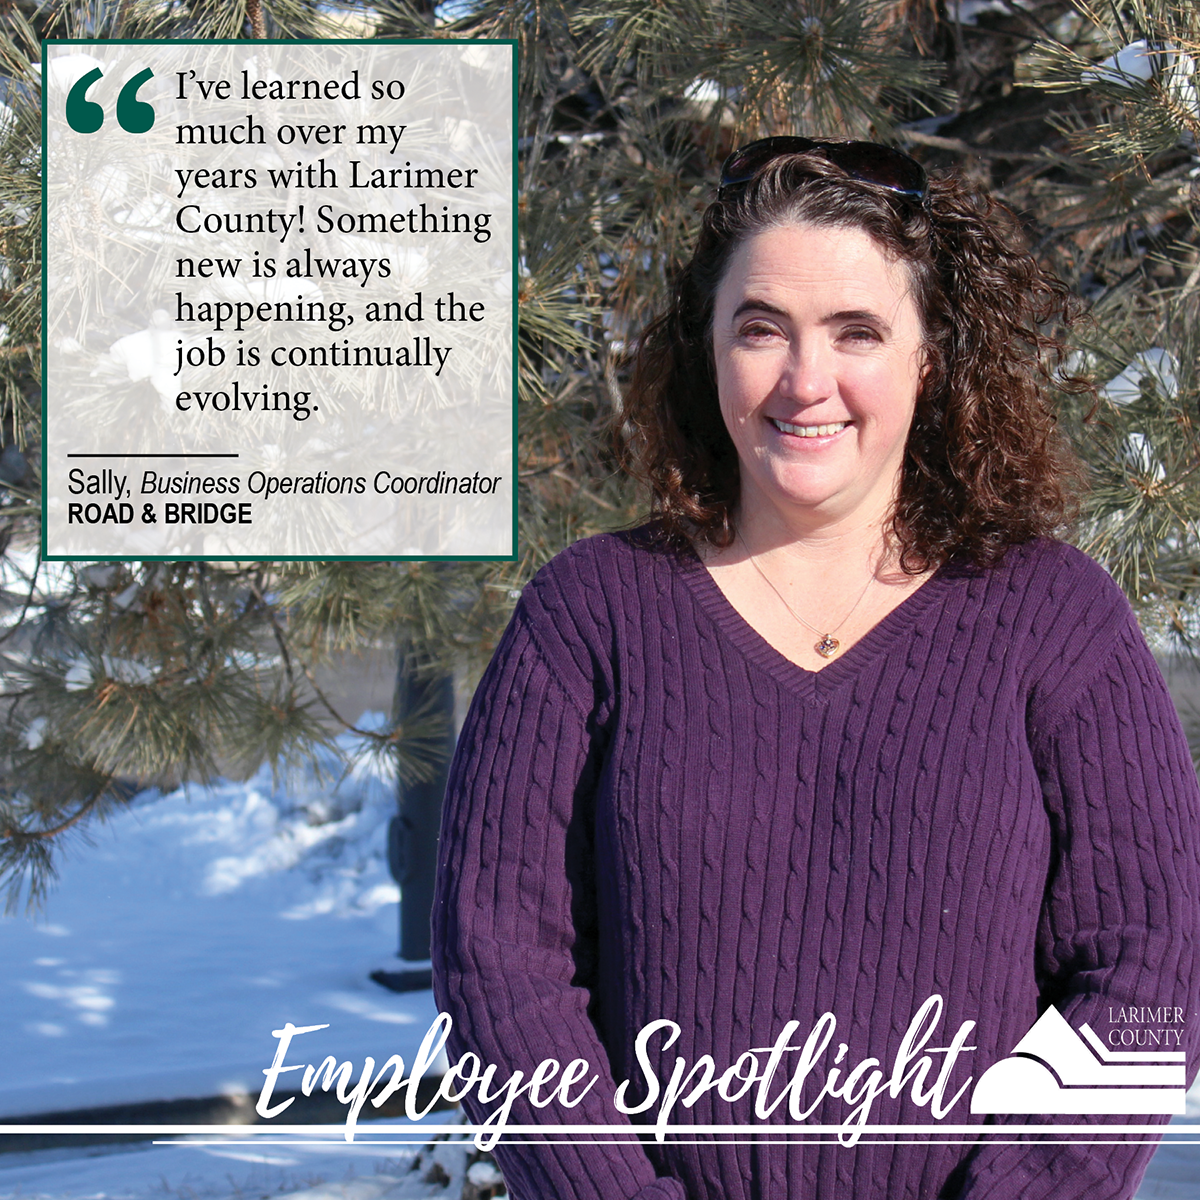 Image 10: "I've learned so much over my years with Larimer County! While the job here is stable, something new is always happening and the job is continually evolving."⁣